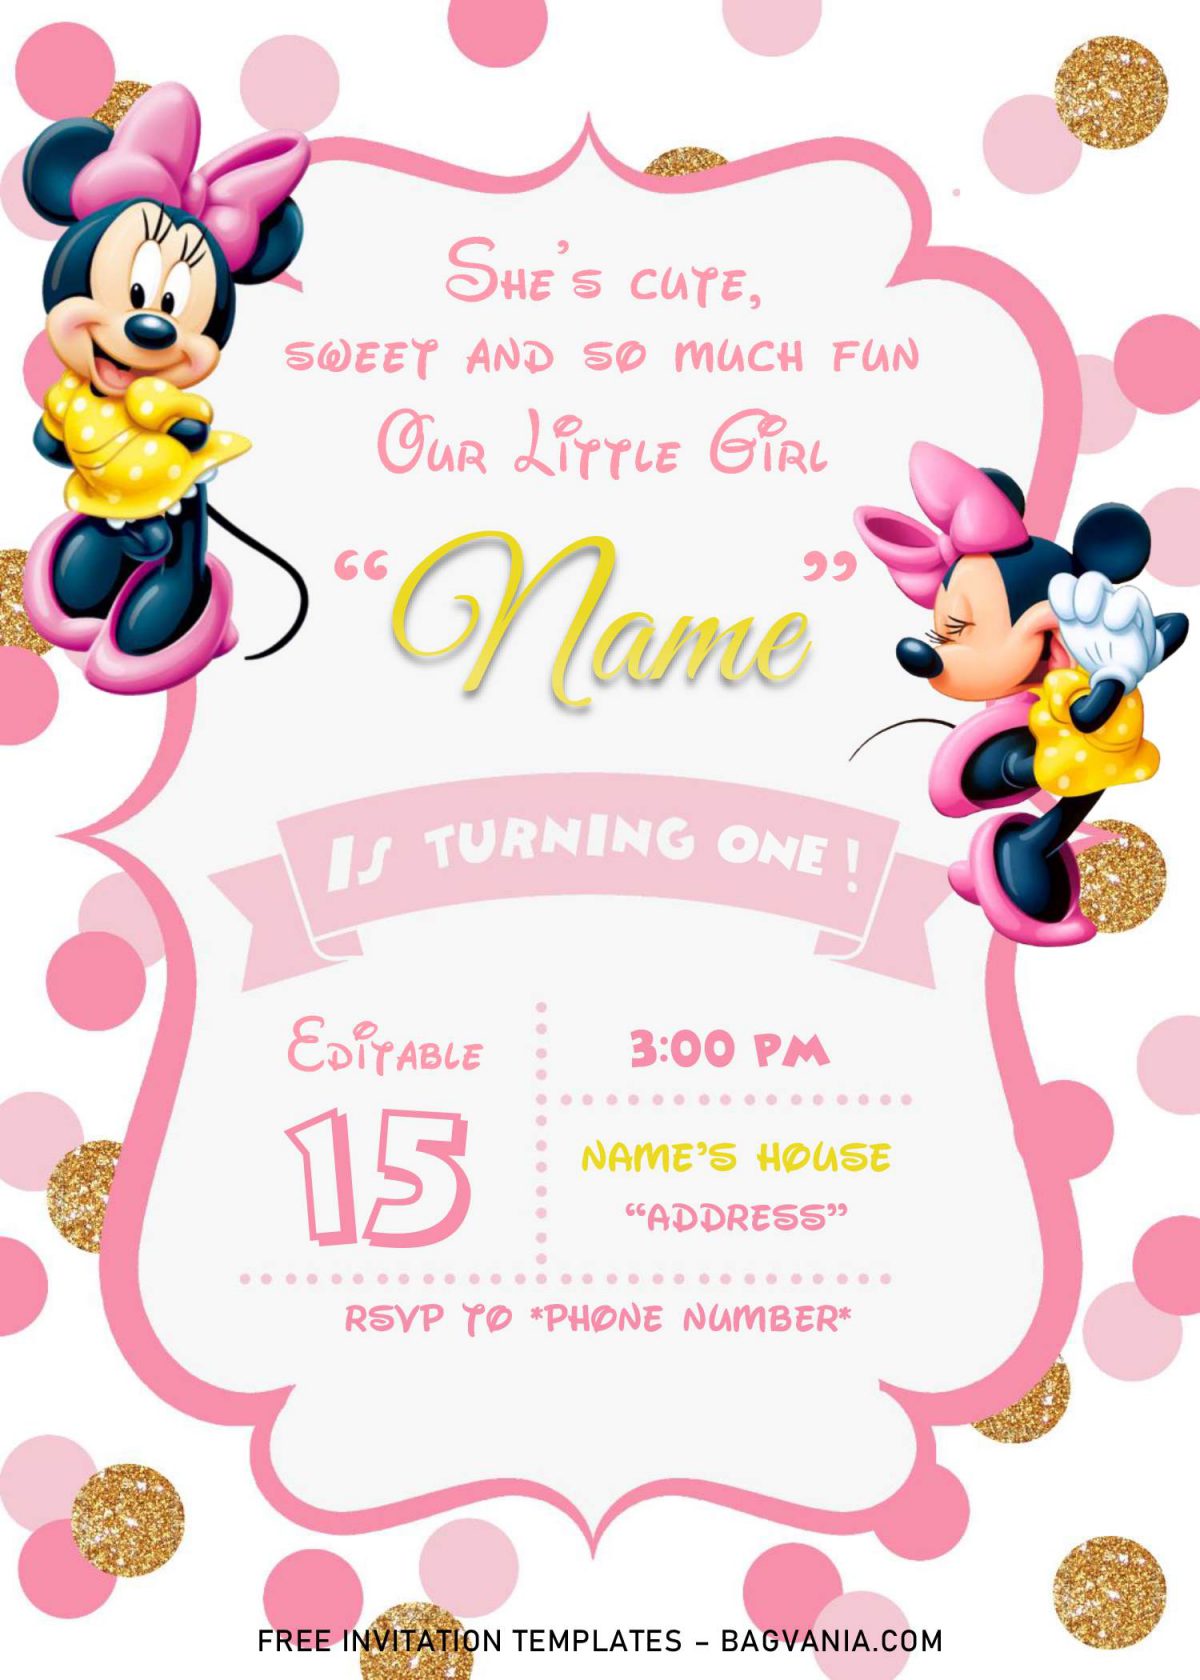 Pink And Gold Minnie Mouse Birthday Invitation Templates - Editable .Docx and has pink and gold glitter background